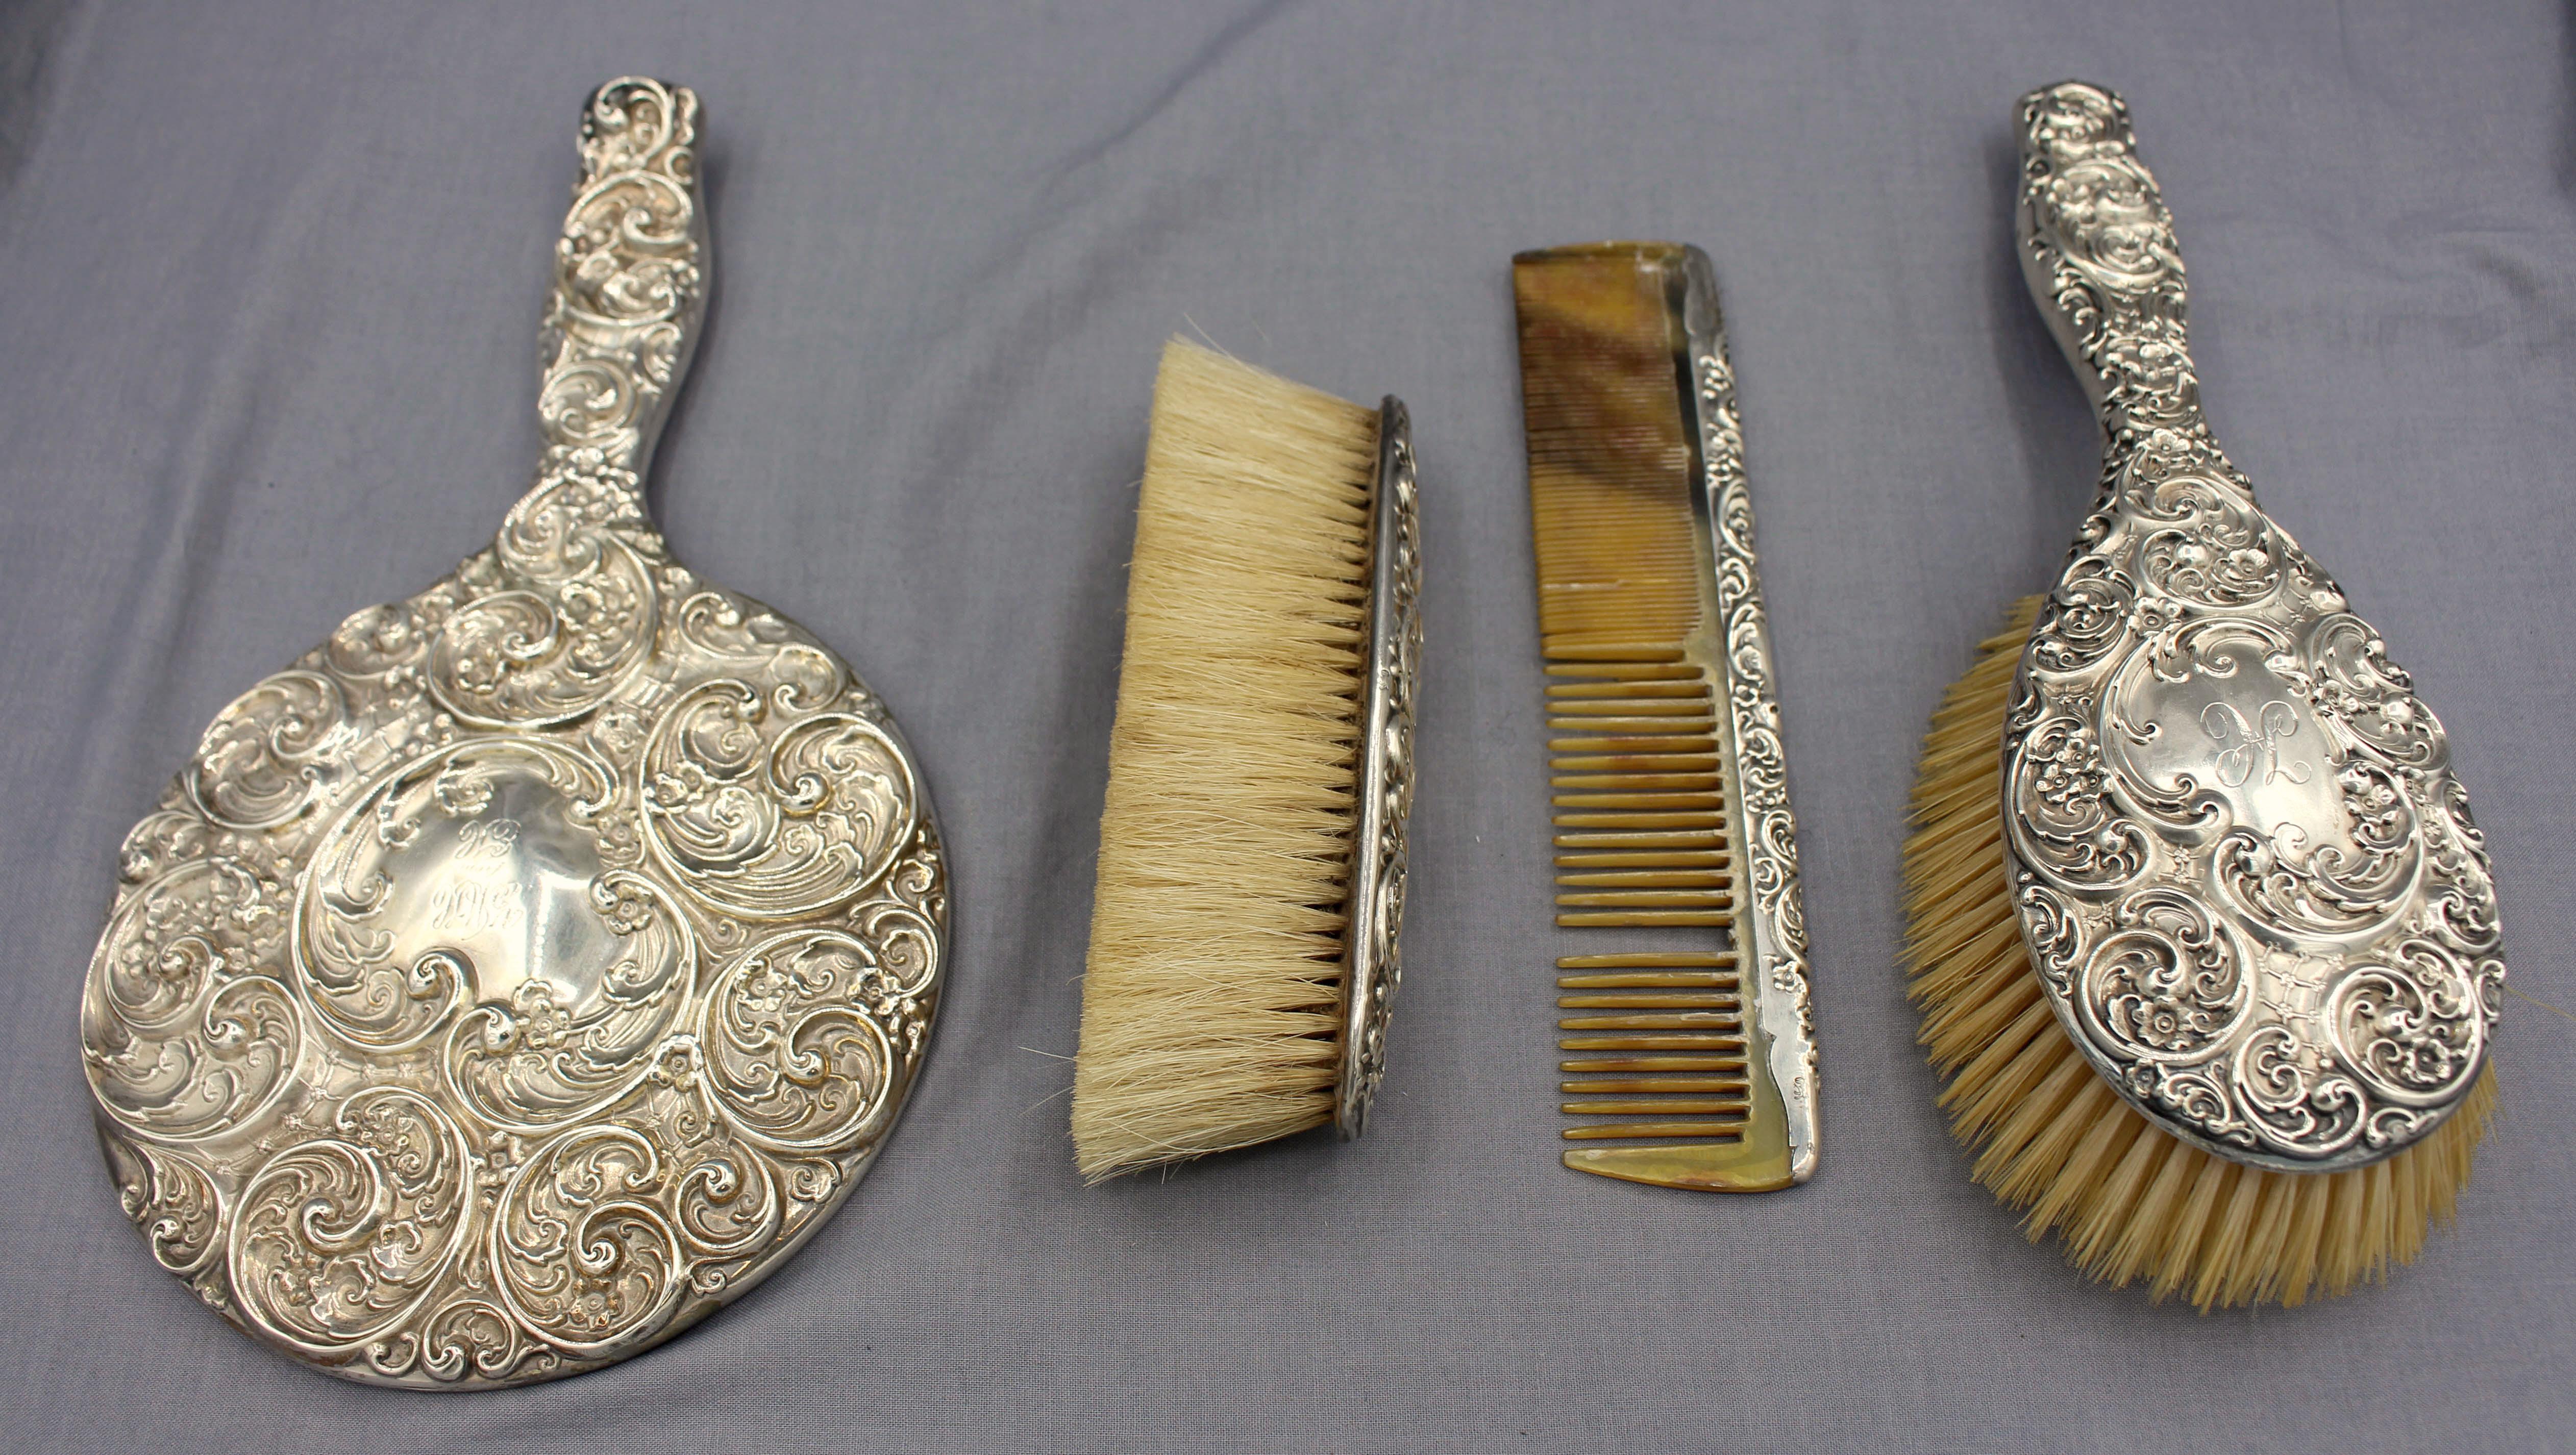 A fine late 19th century repousse decorated American sterling silver 4-piece dresser set.
Brush: 9